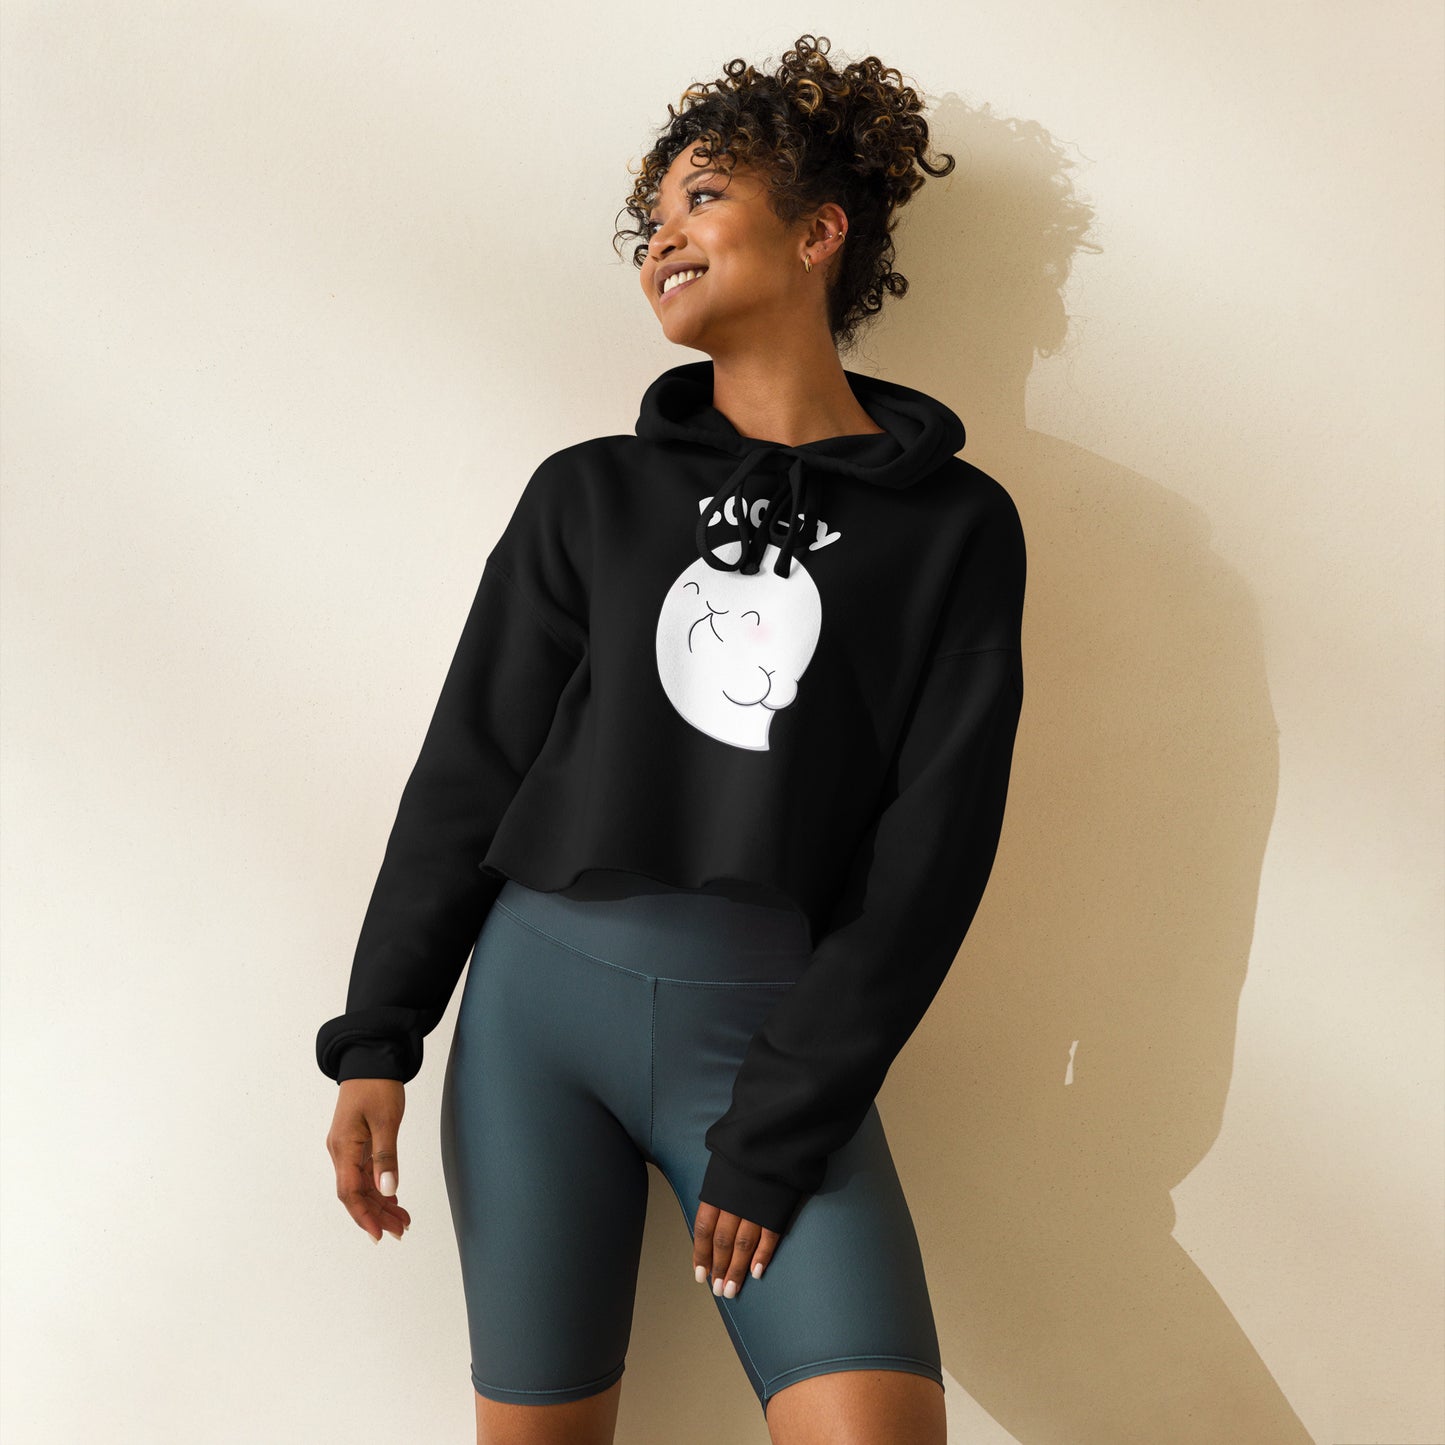 Boo-ty - Cropped Hoodie